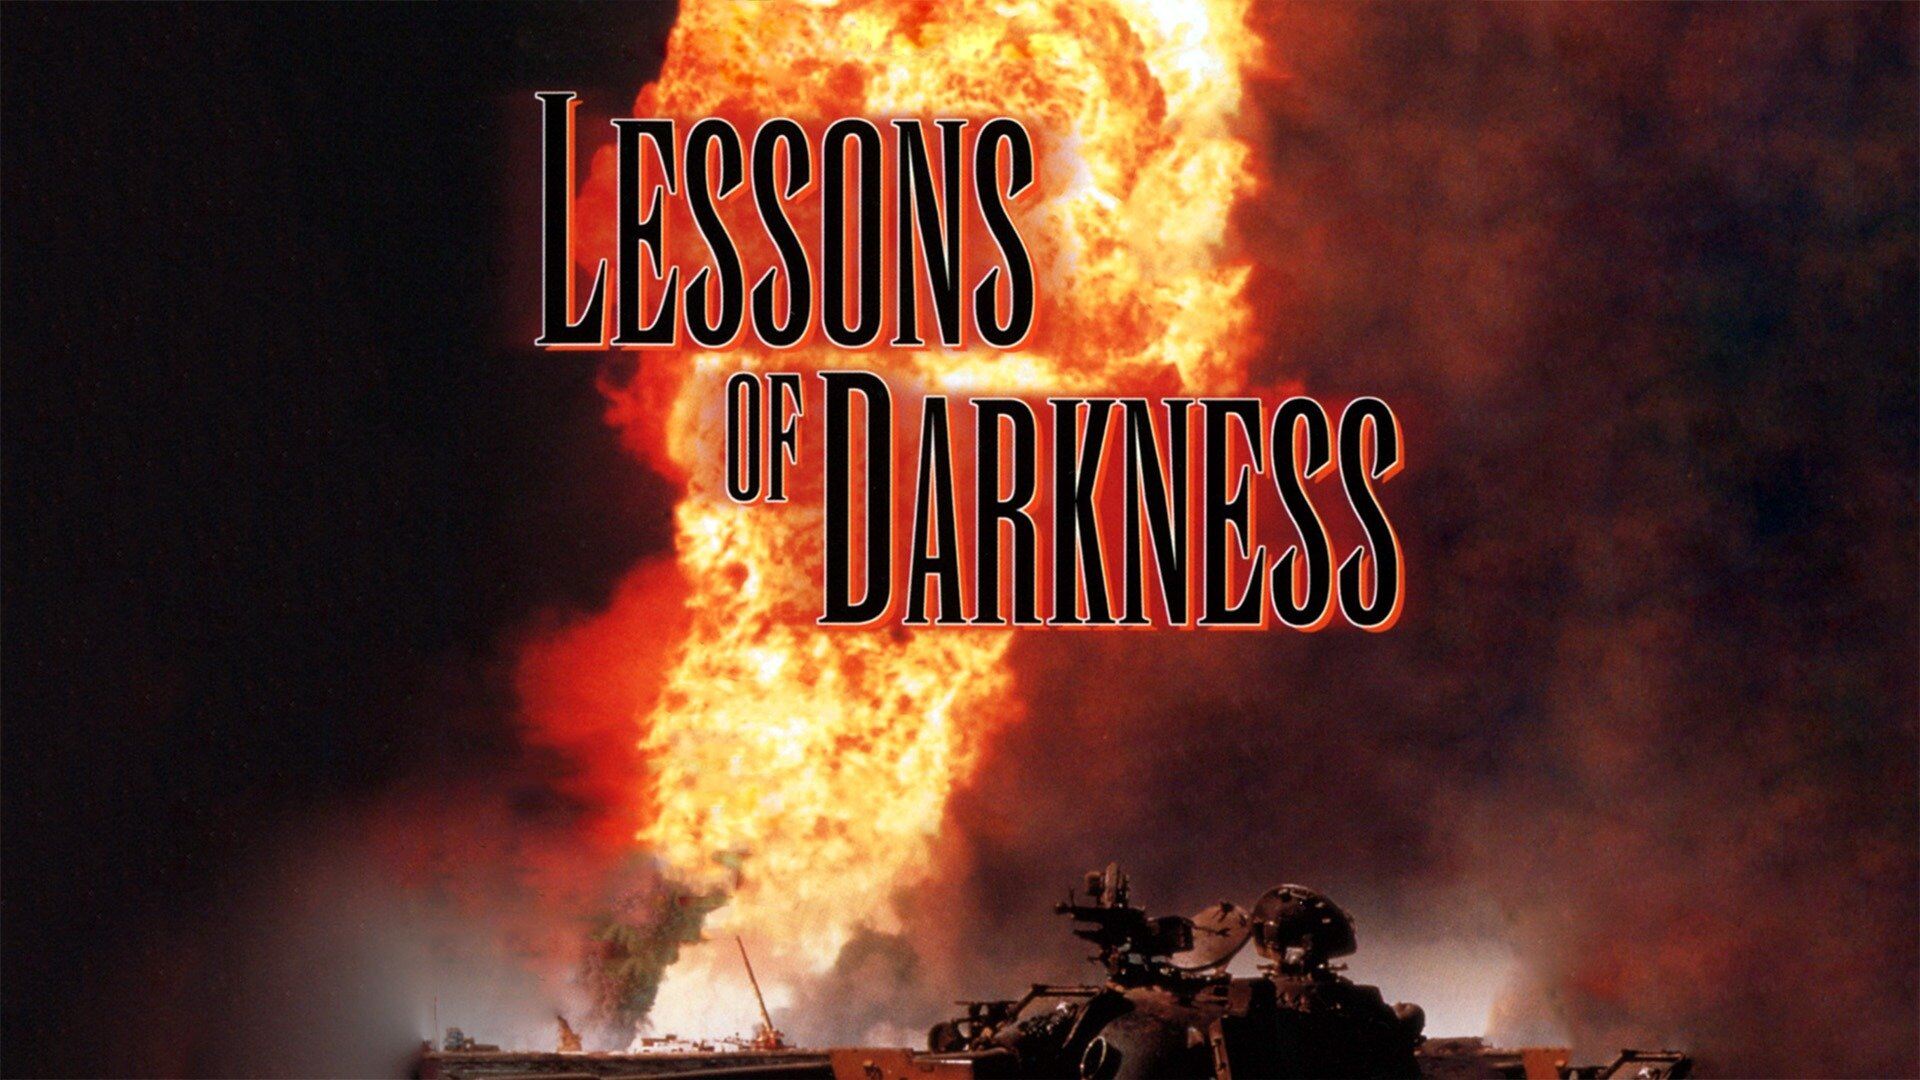 43-facts-about-the-movie-lessons-of-darkness